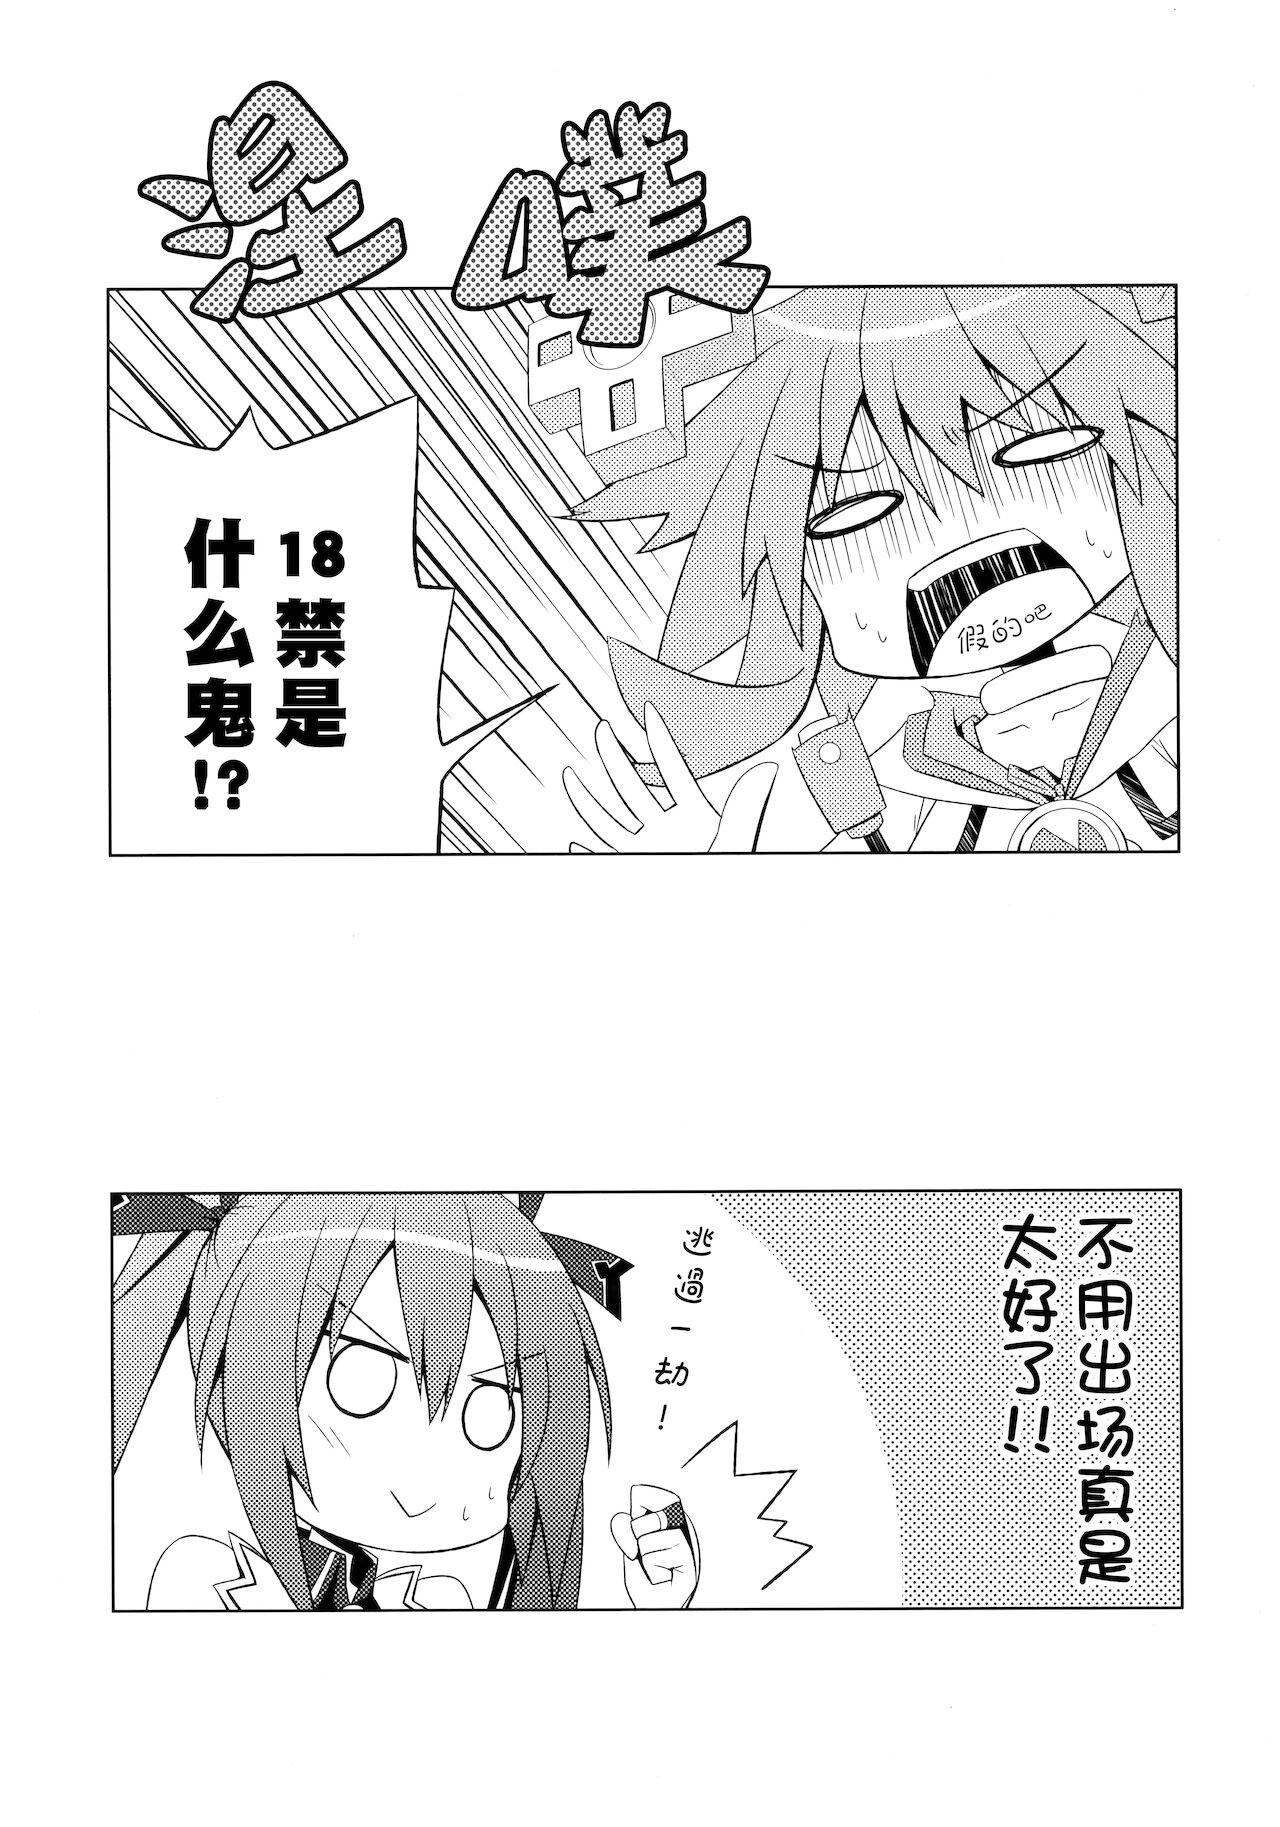 A certain Nepgear was harmed in the making of this doujinshi 1